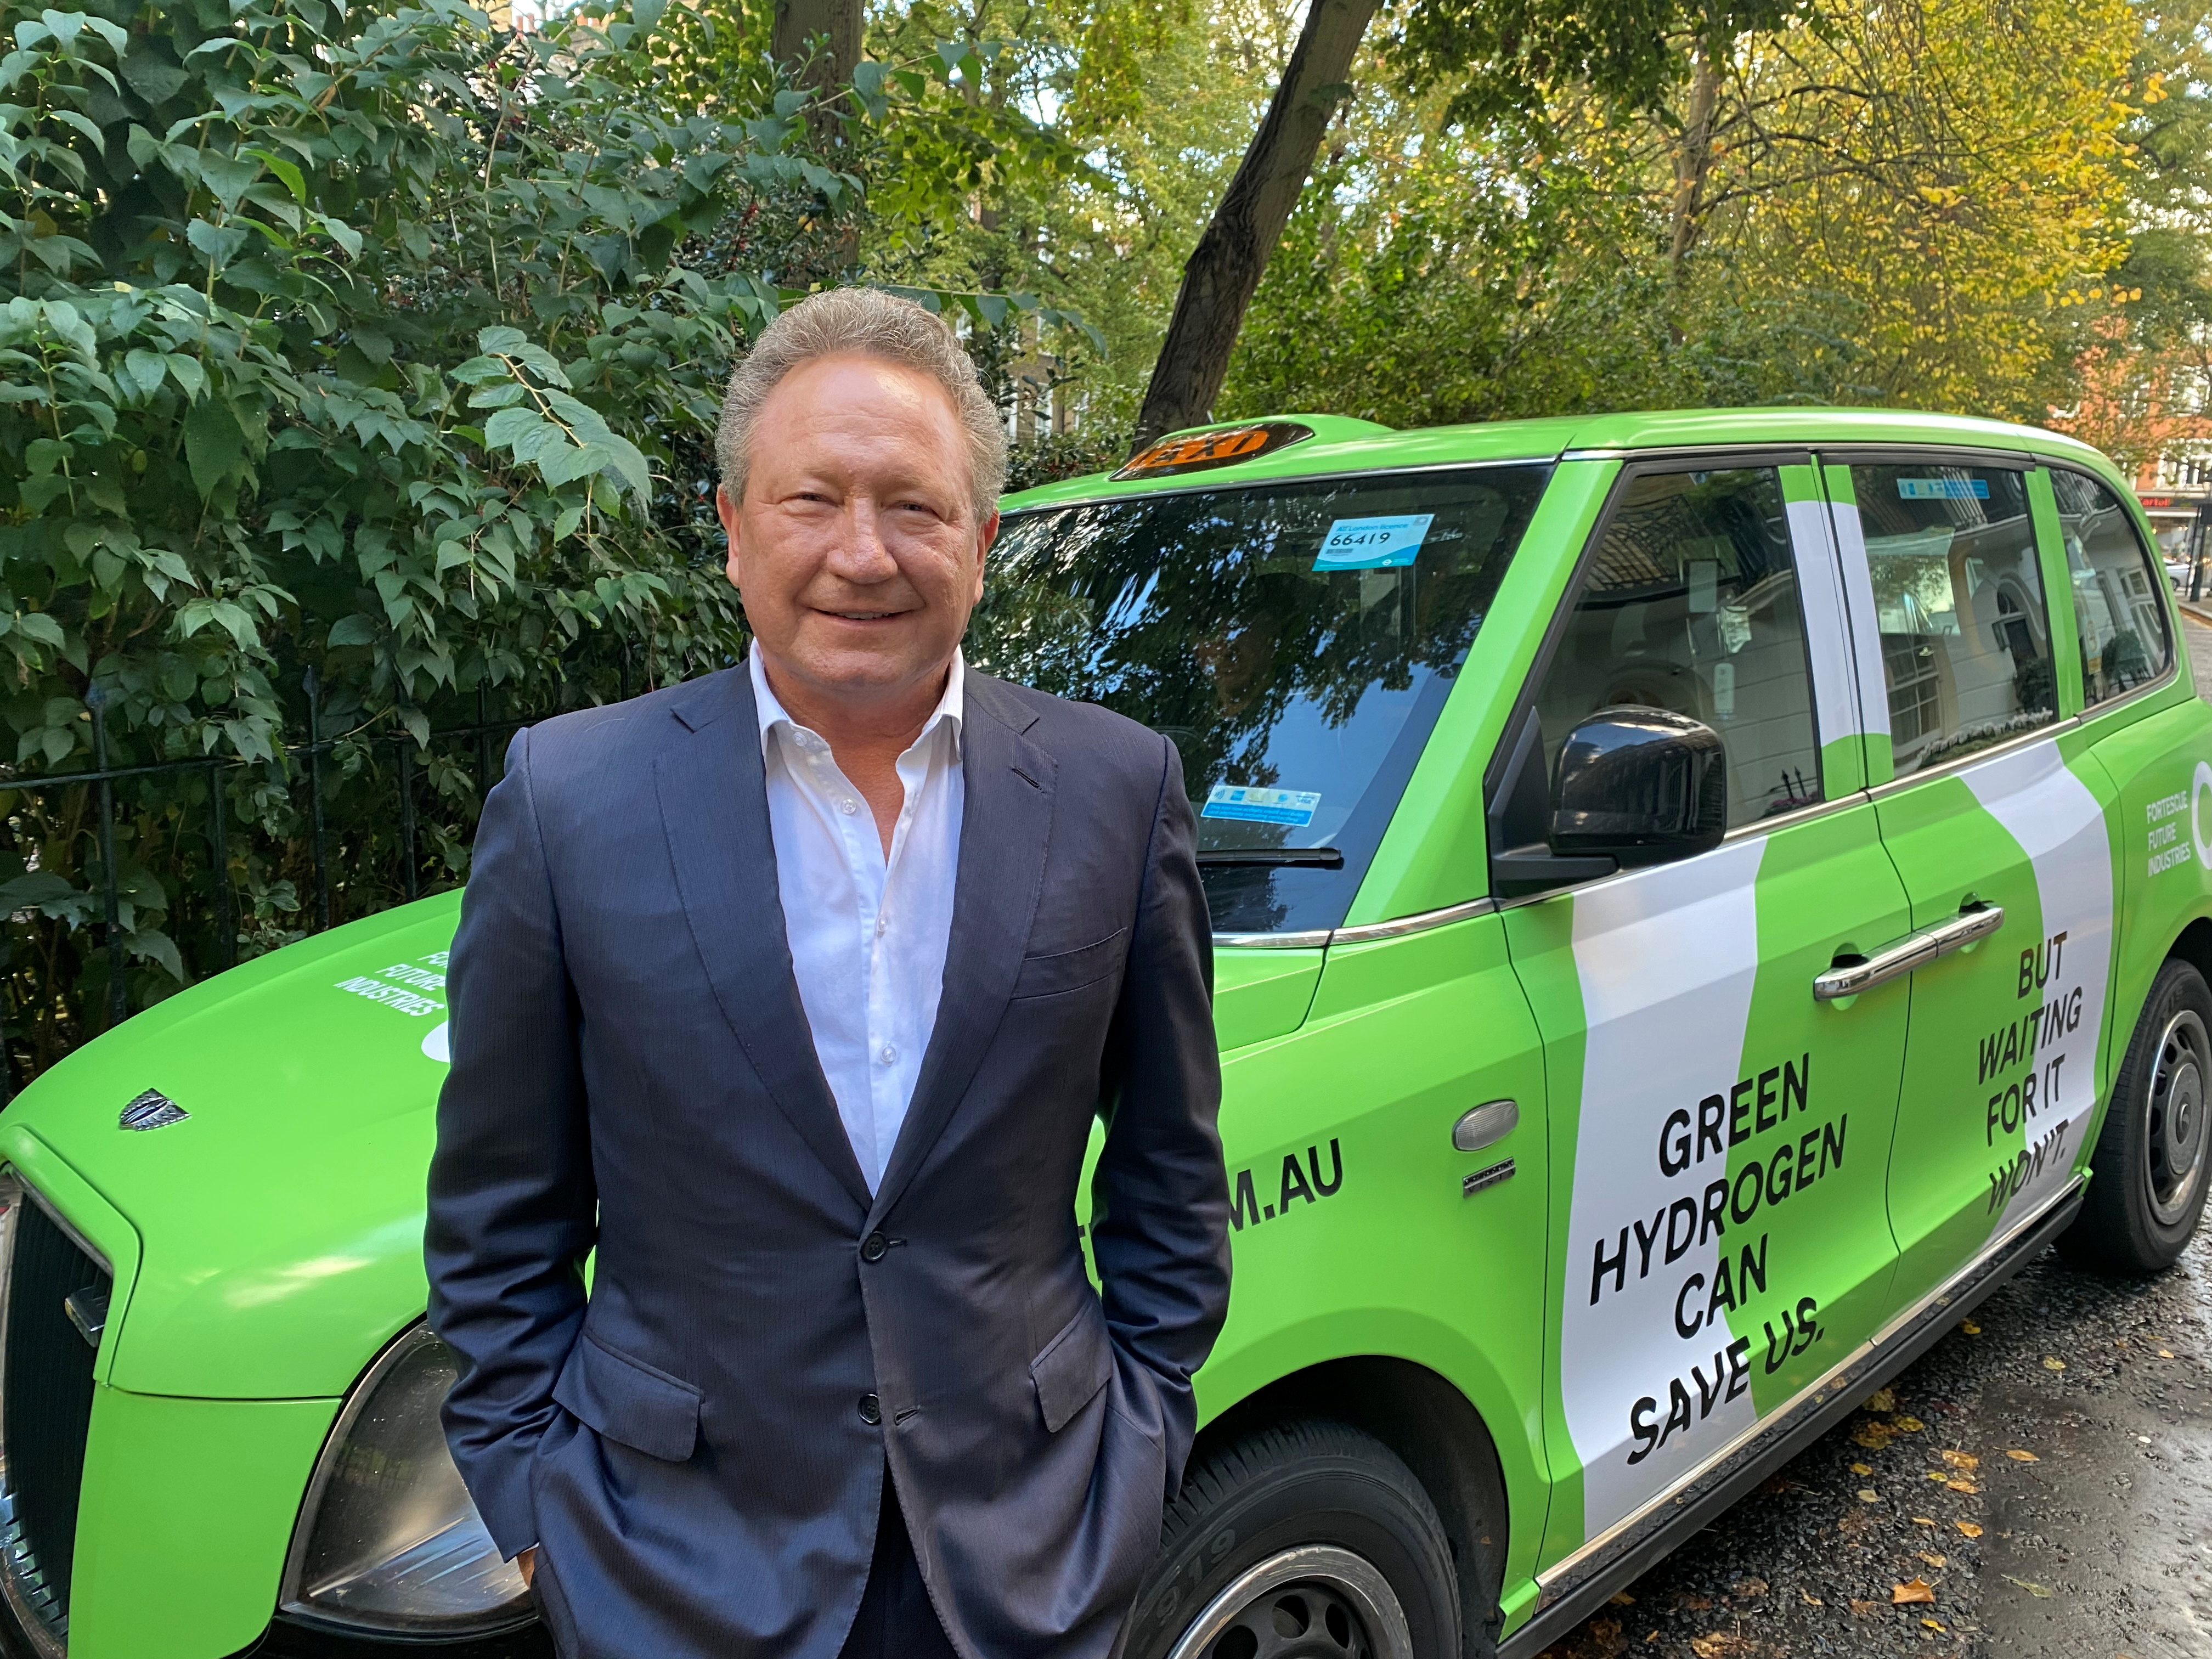 Andrew Forrest, Australian billionaire and Chief Executive Officer of Fortescue Metals Group do not undermine the drive for clean energy alternatives such as green hydrogen in London